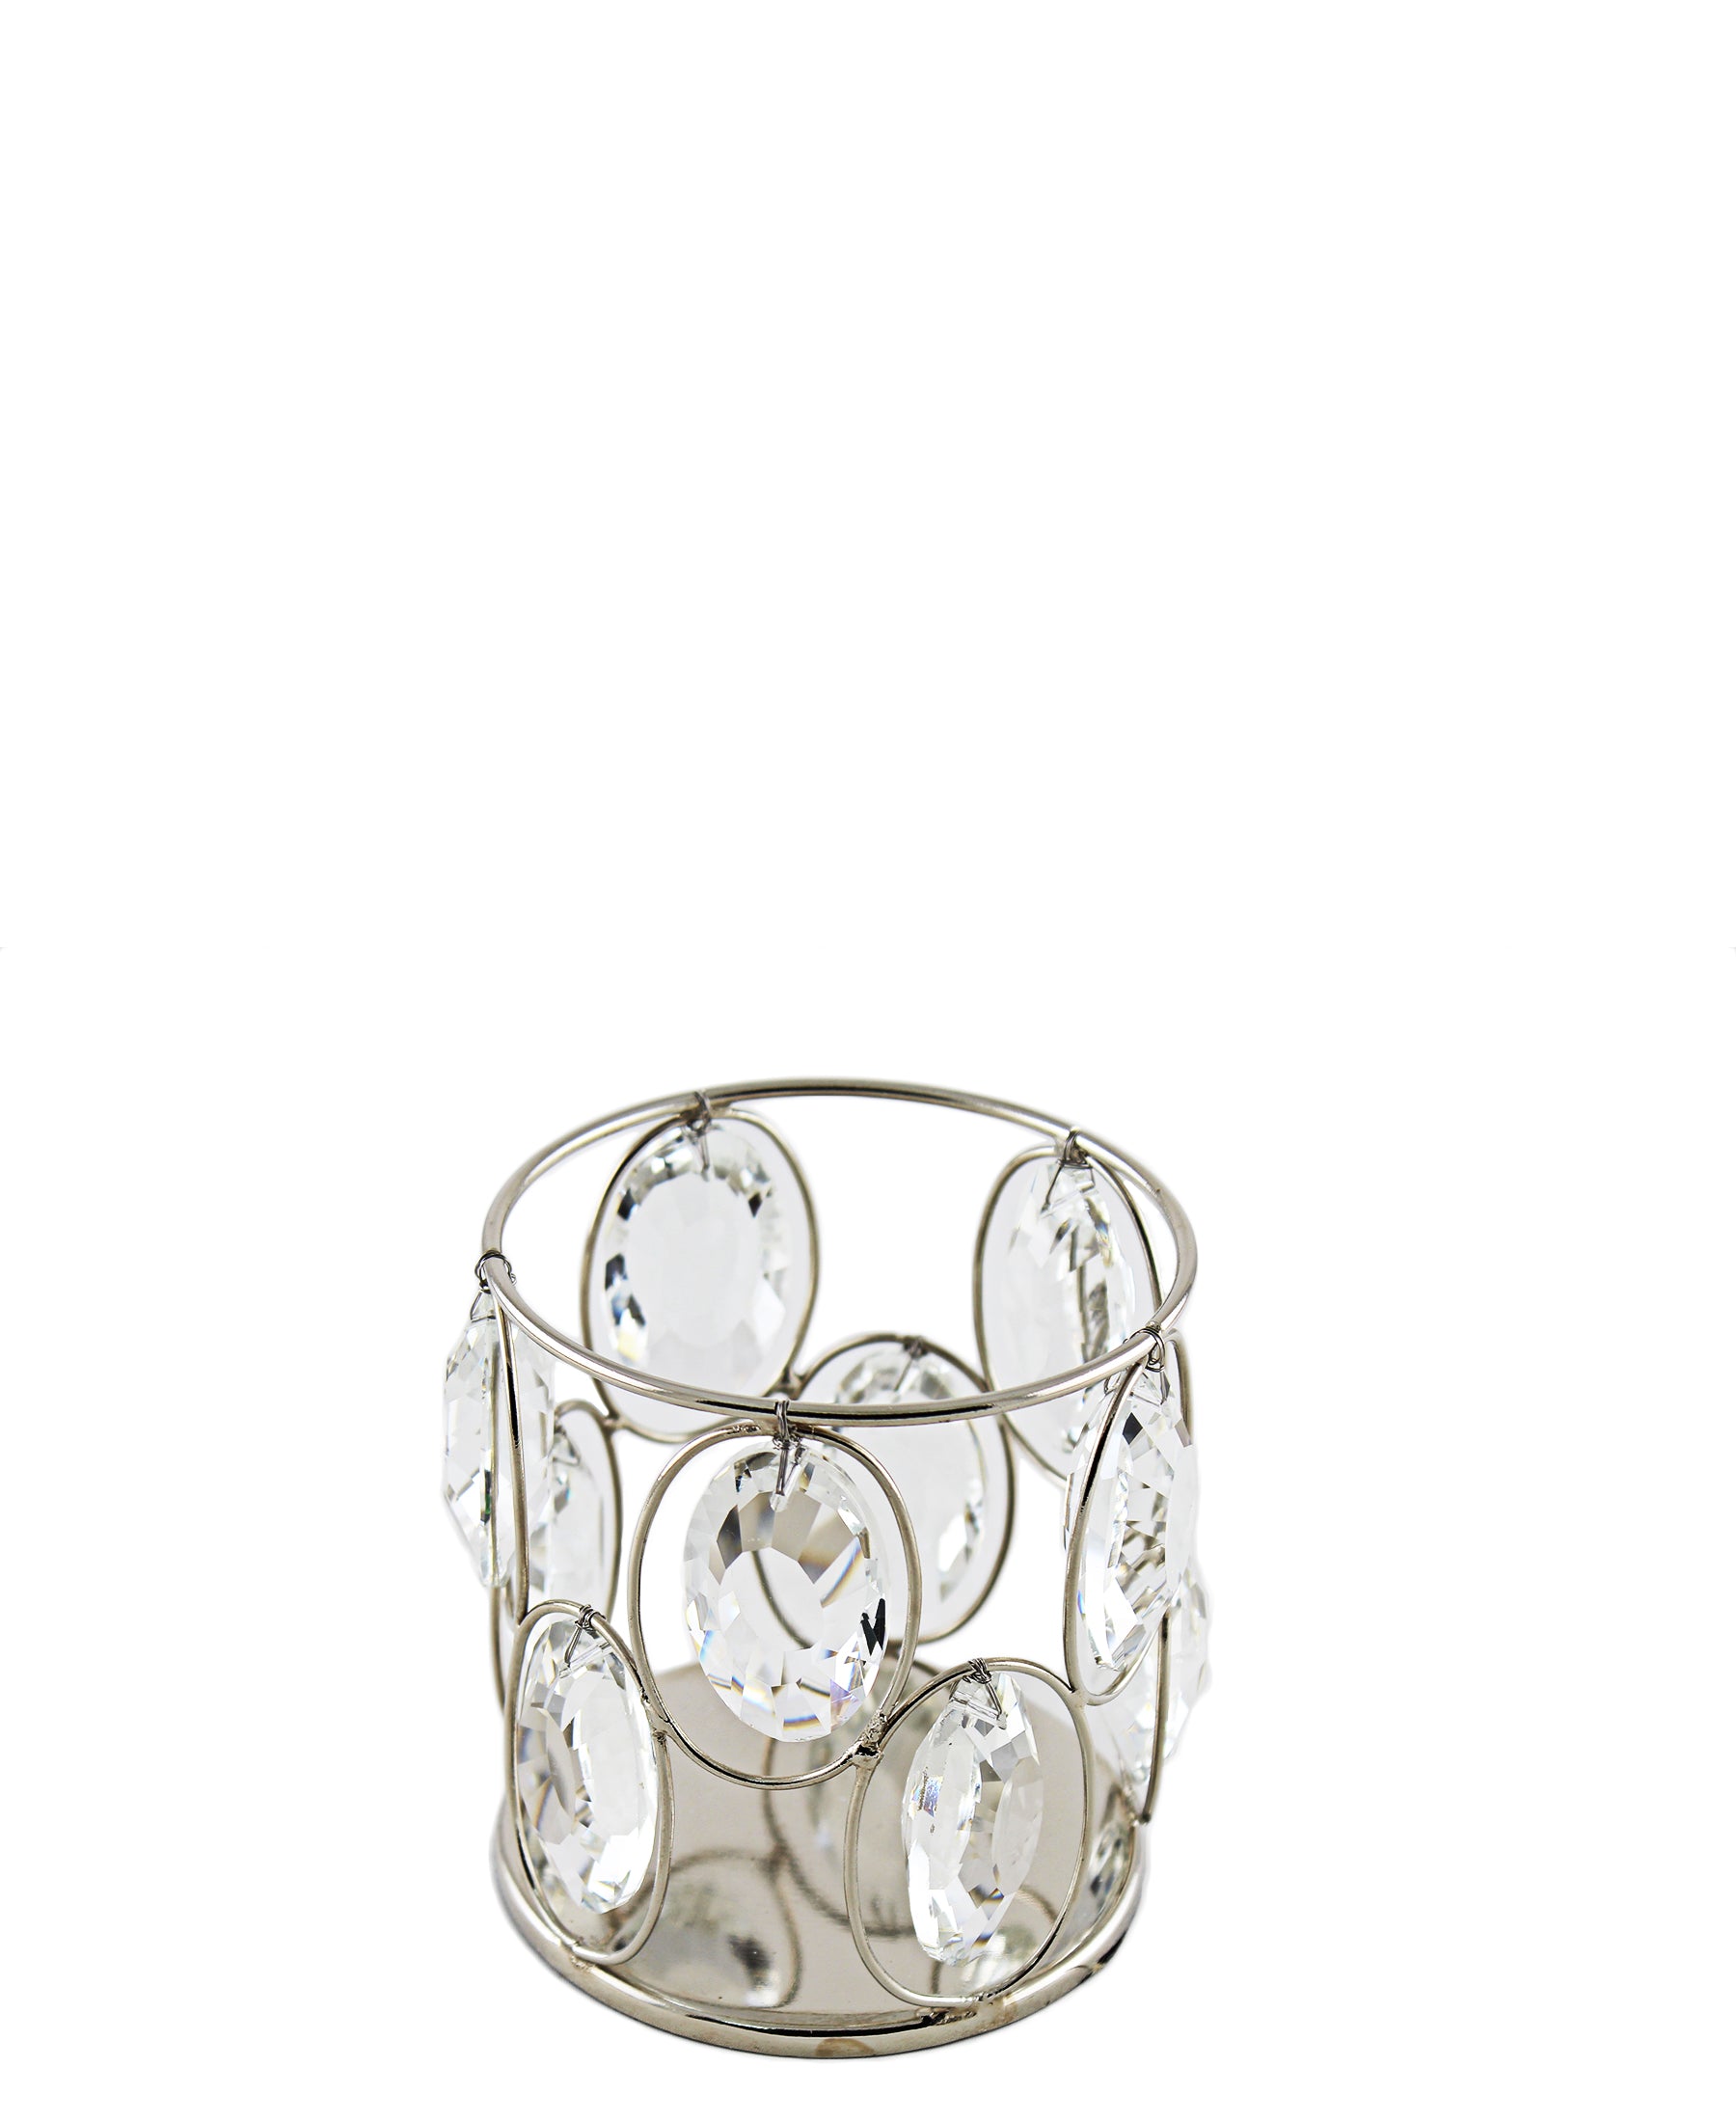 Majestic Crystal Candle Holder - Silver